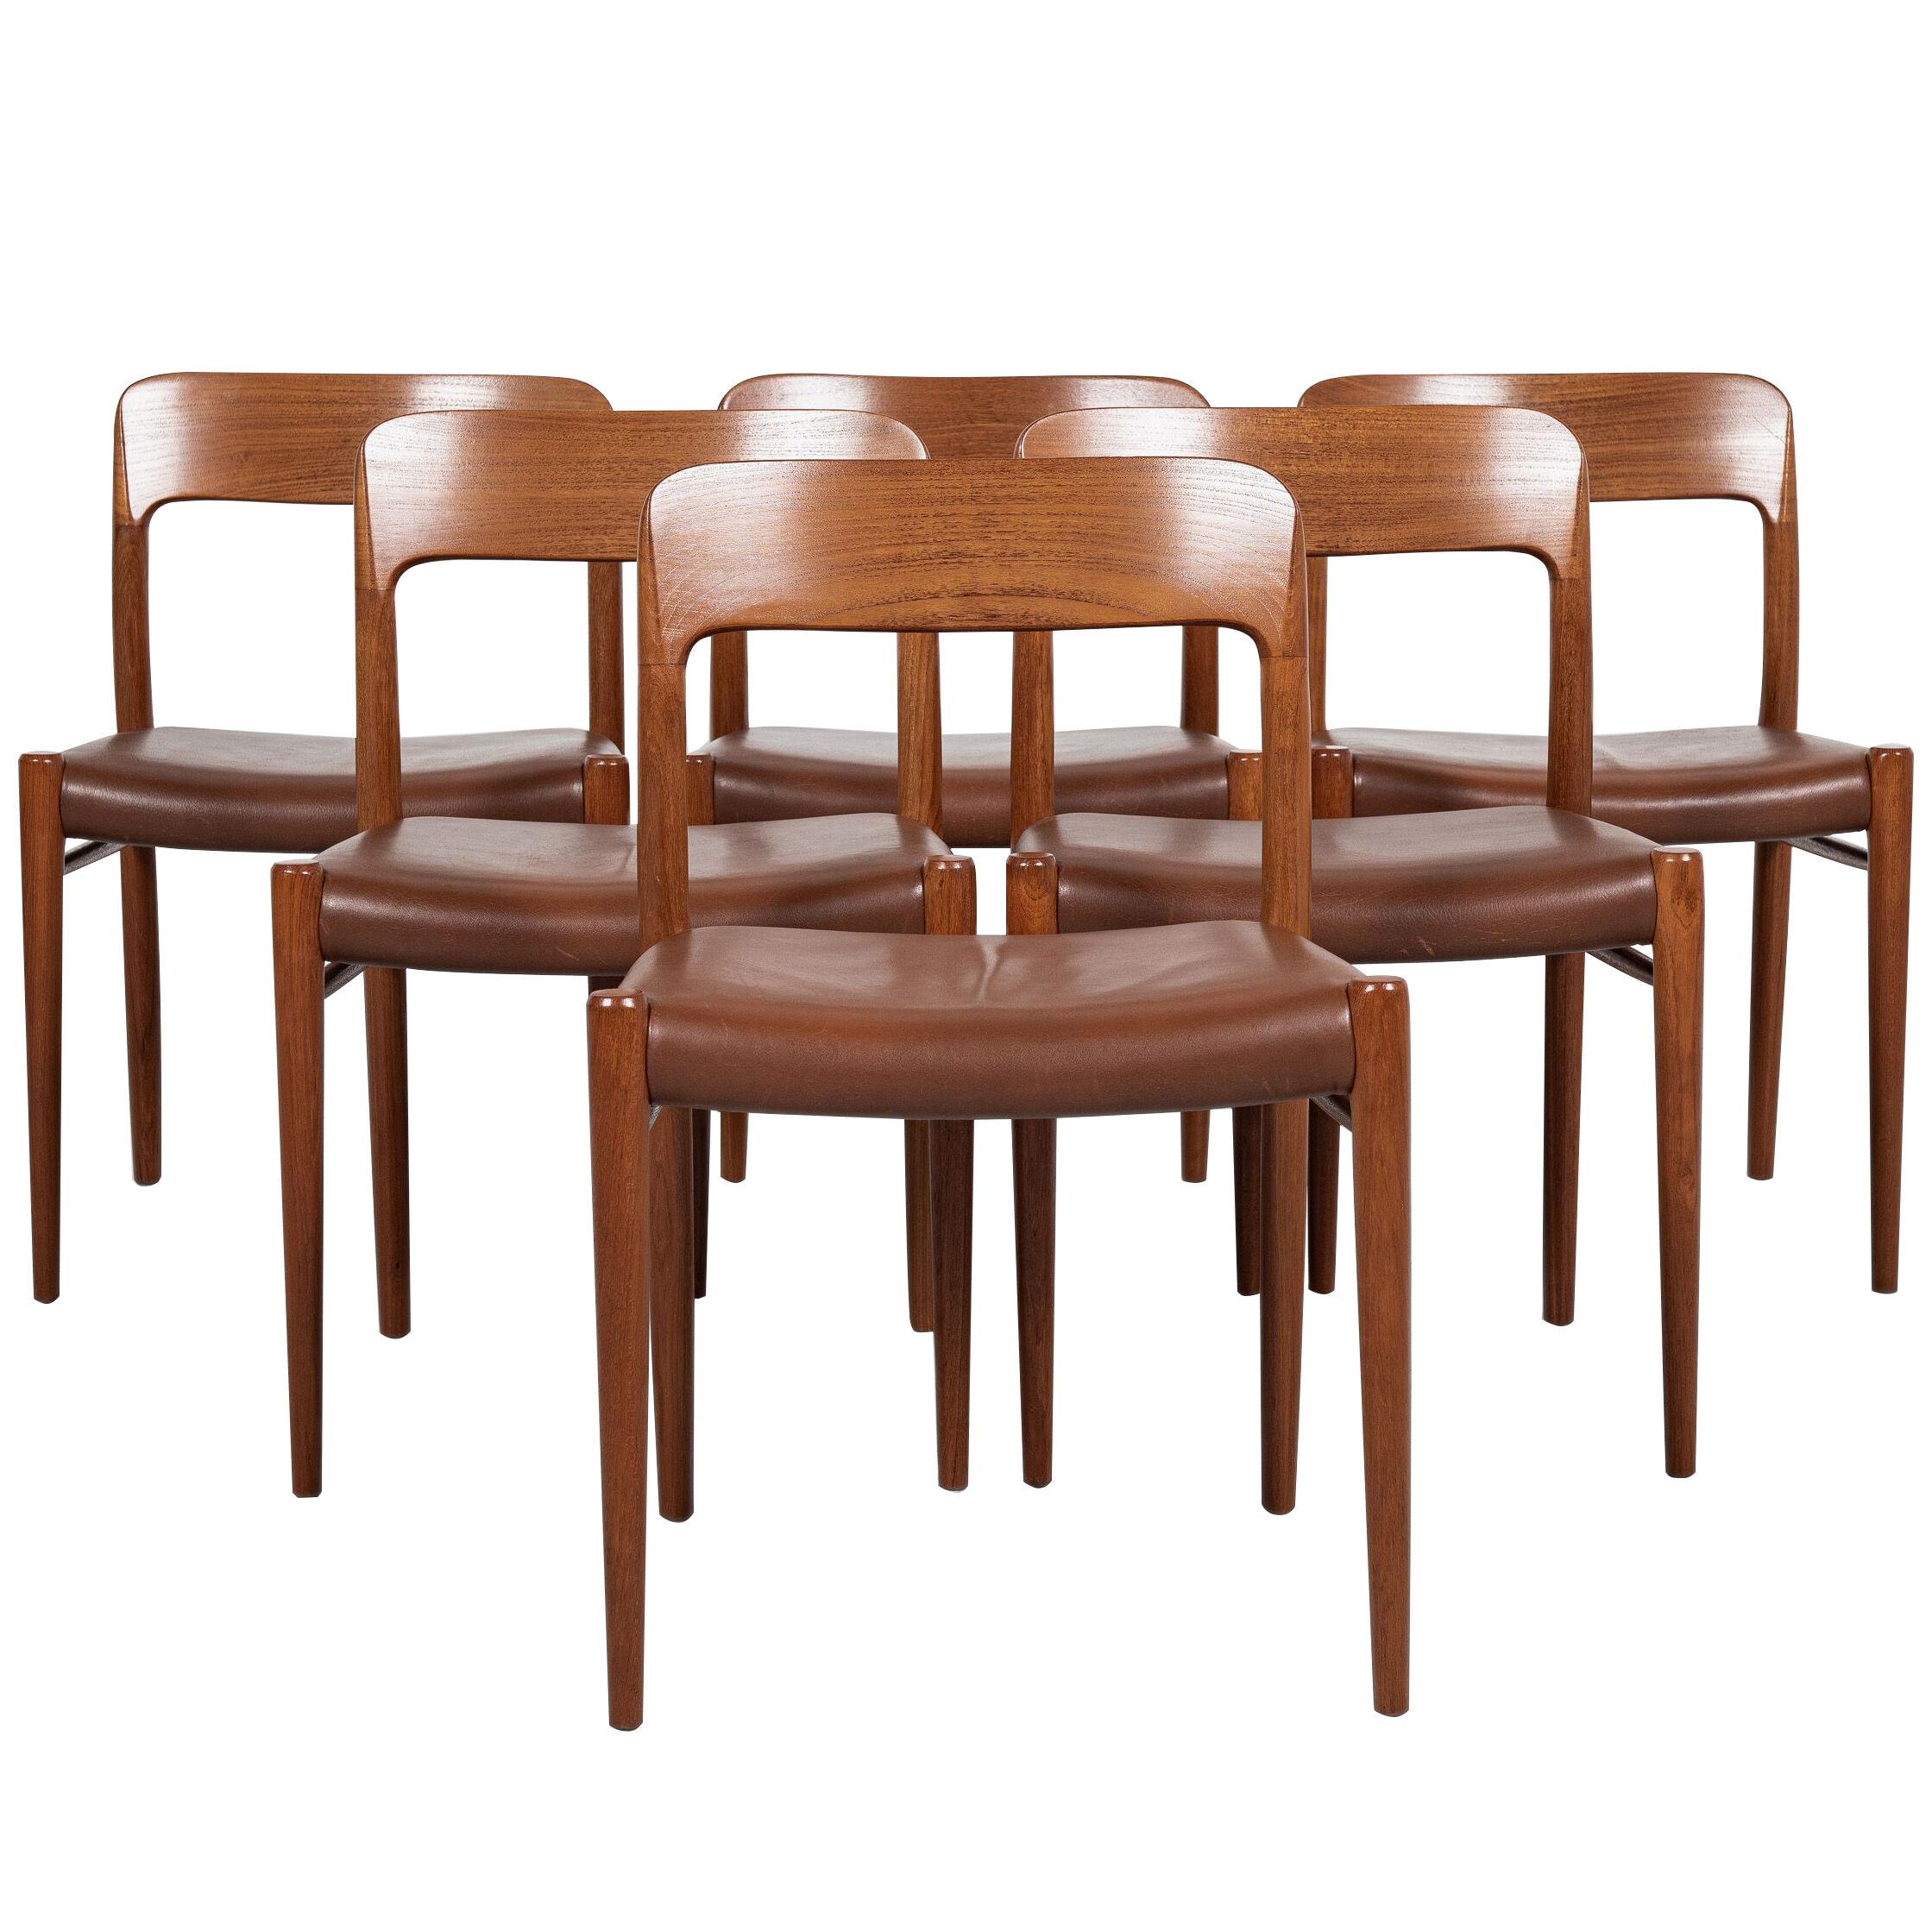 Midcentury Danish set of 6 chairs Model 75 in teak and aniline leather by Møller